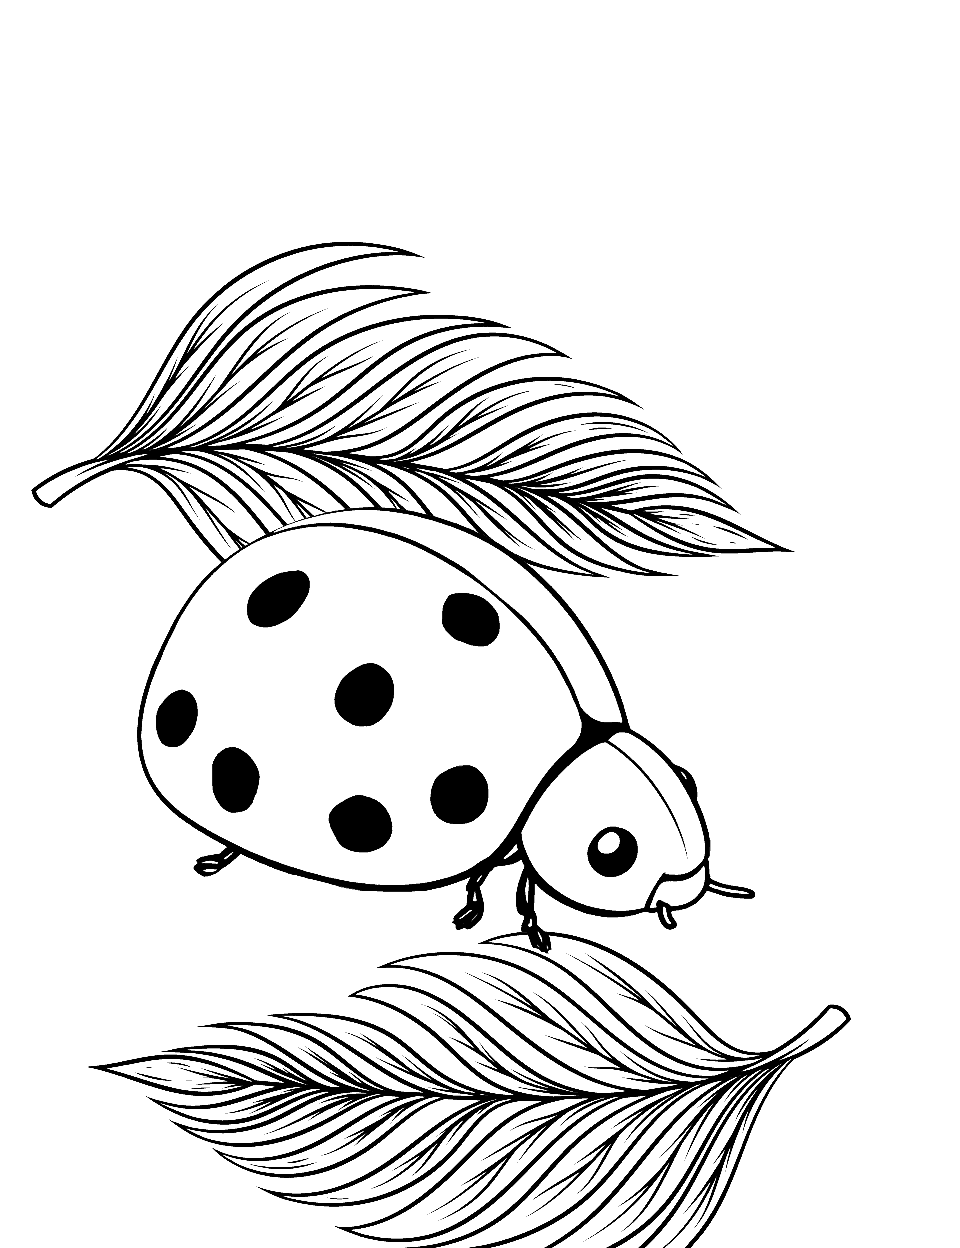 Ladybug on the Hunt Coloring Page - A ladybug looking around on the ground for food.